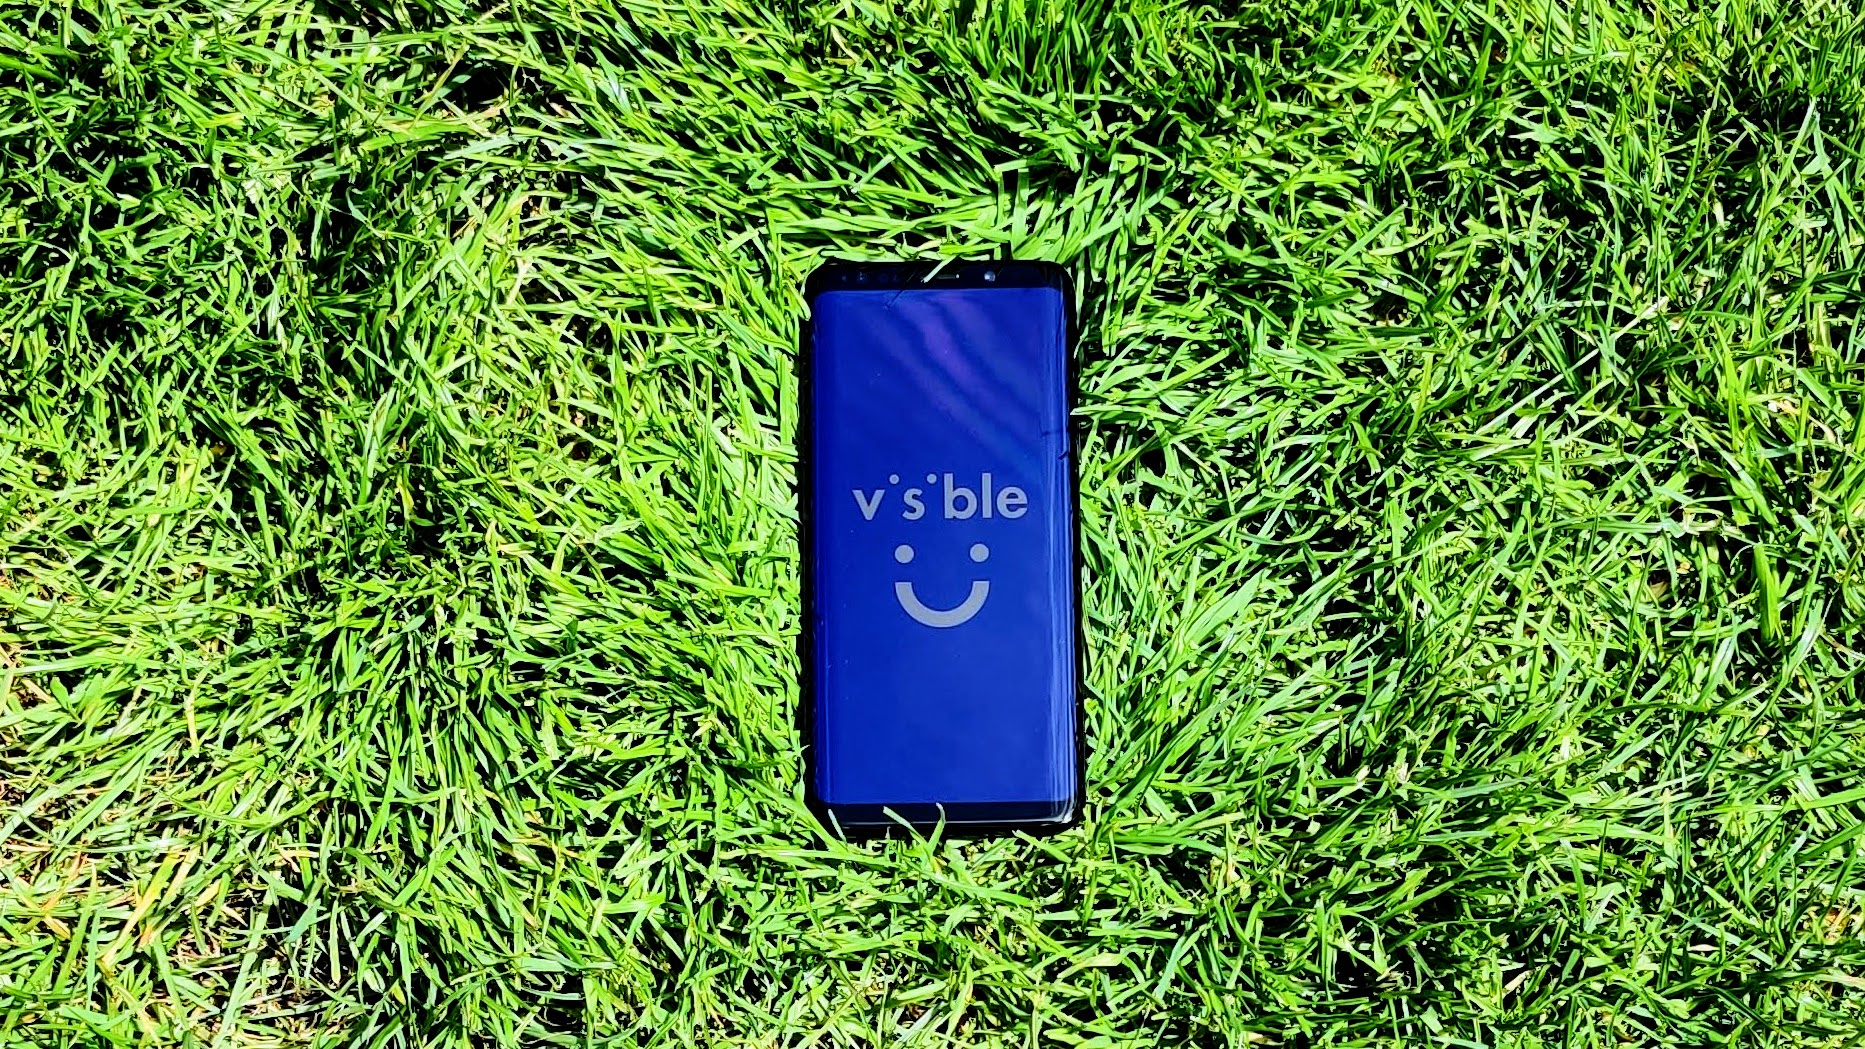 A Samsung Galaxy S9 on some grass with the Visible logo on the display.